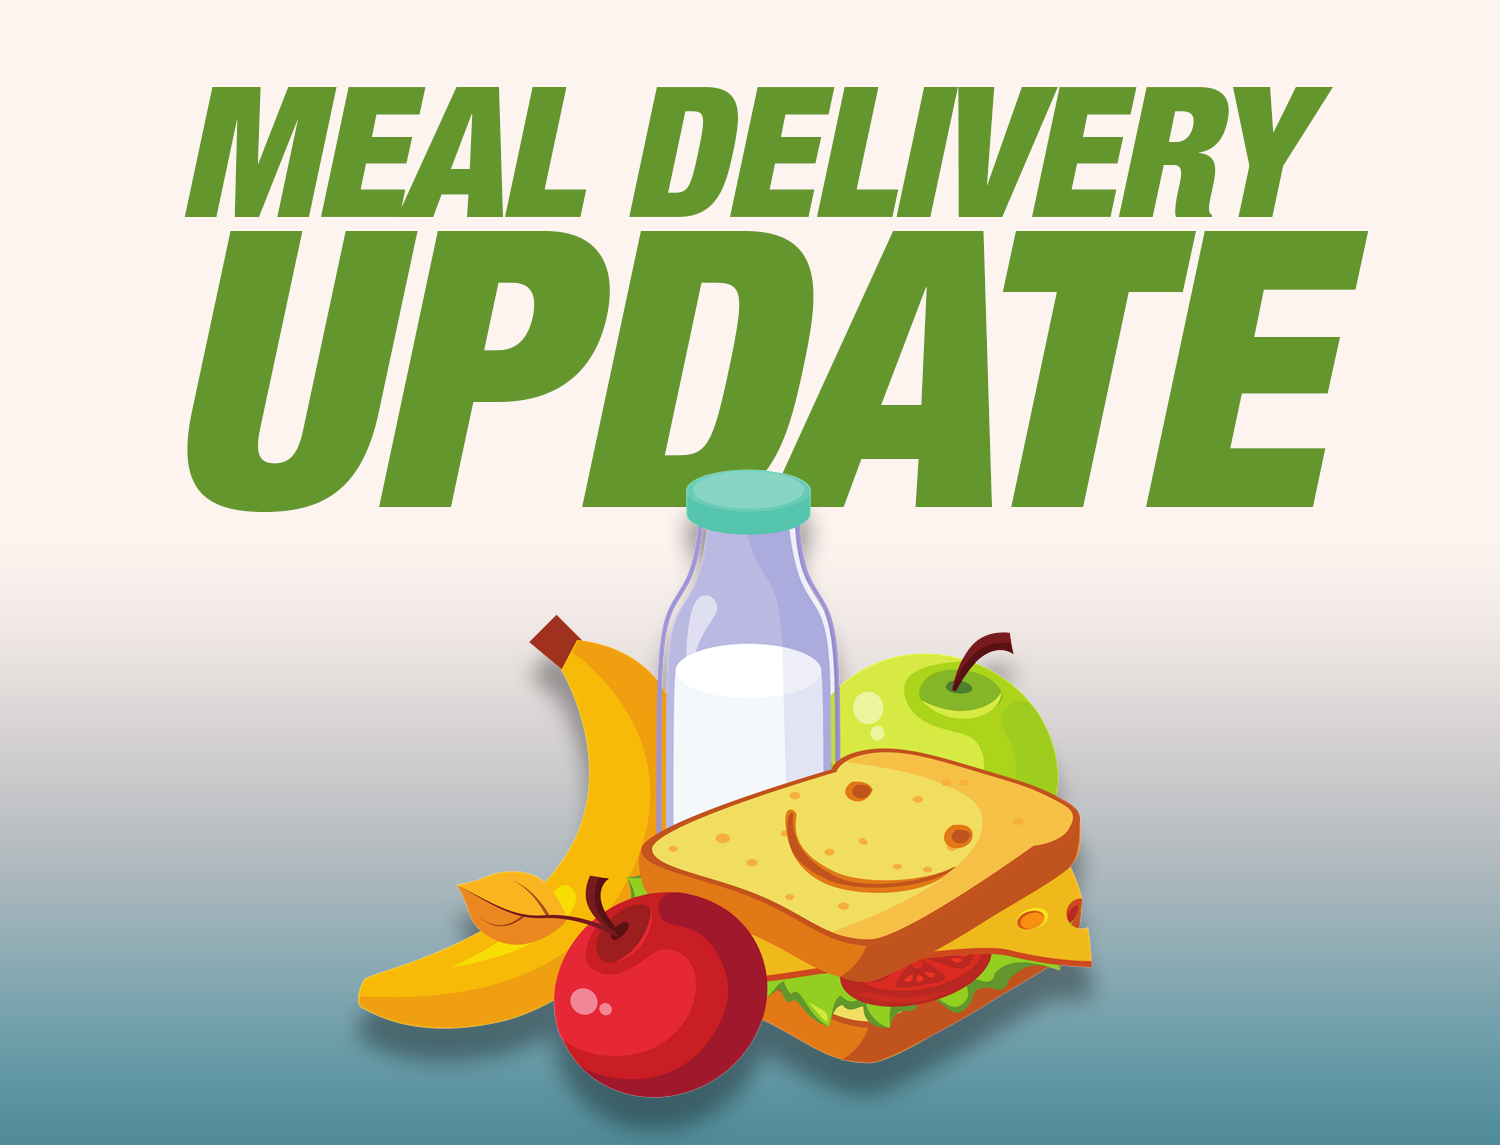 Meal Delivery Update